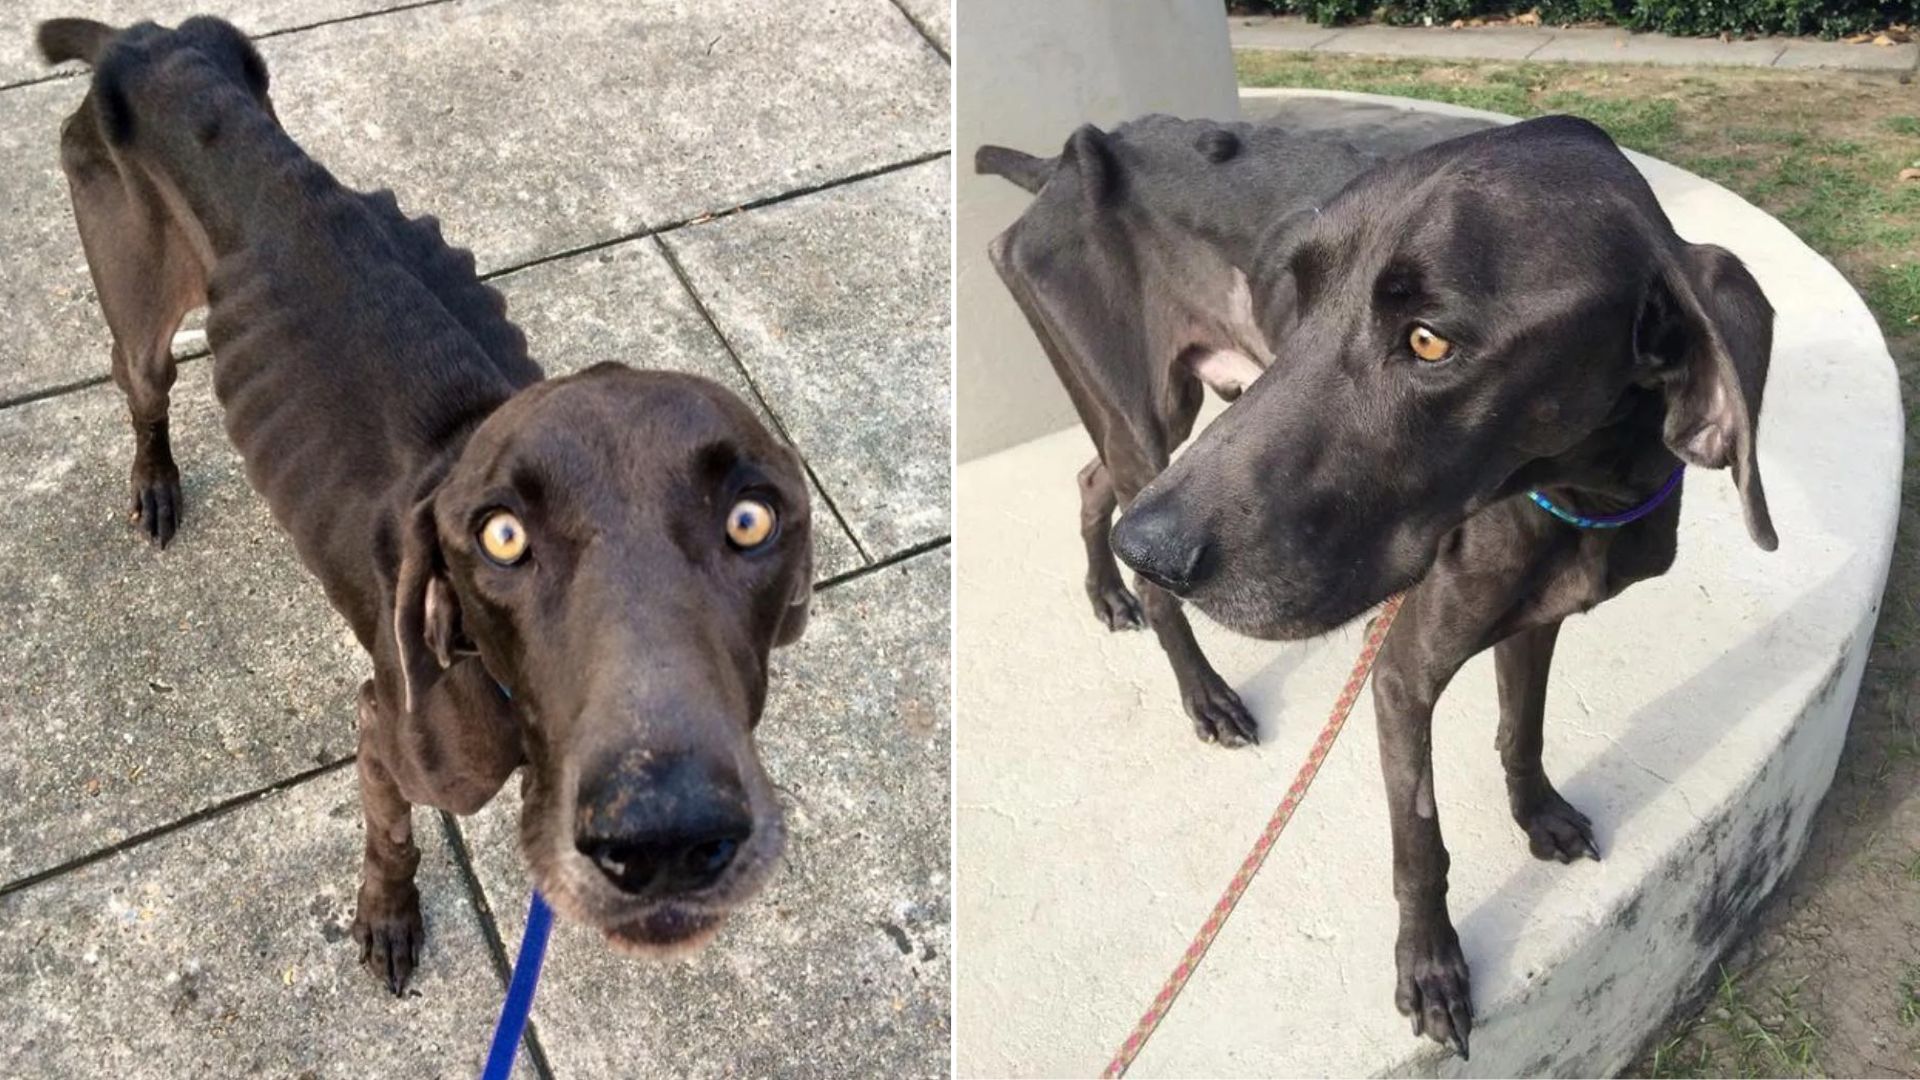 Skinny Dog That Ate Rocks And Twigs In Desperate Need Of Food Finally Gets A New Family